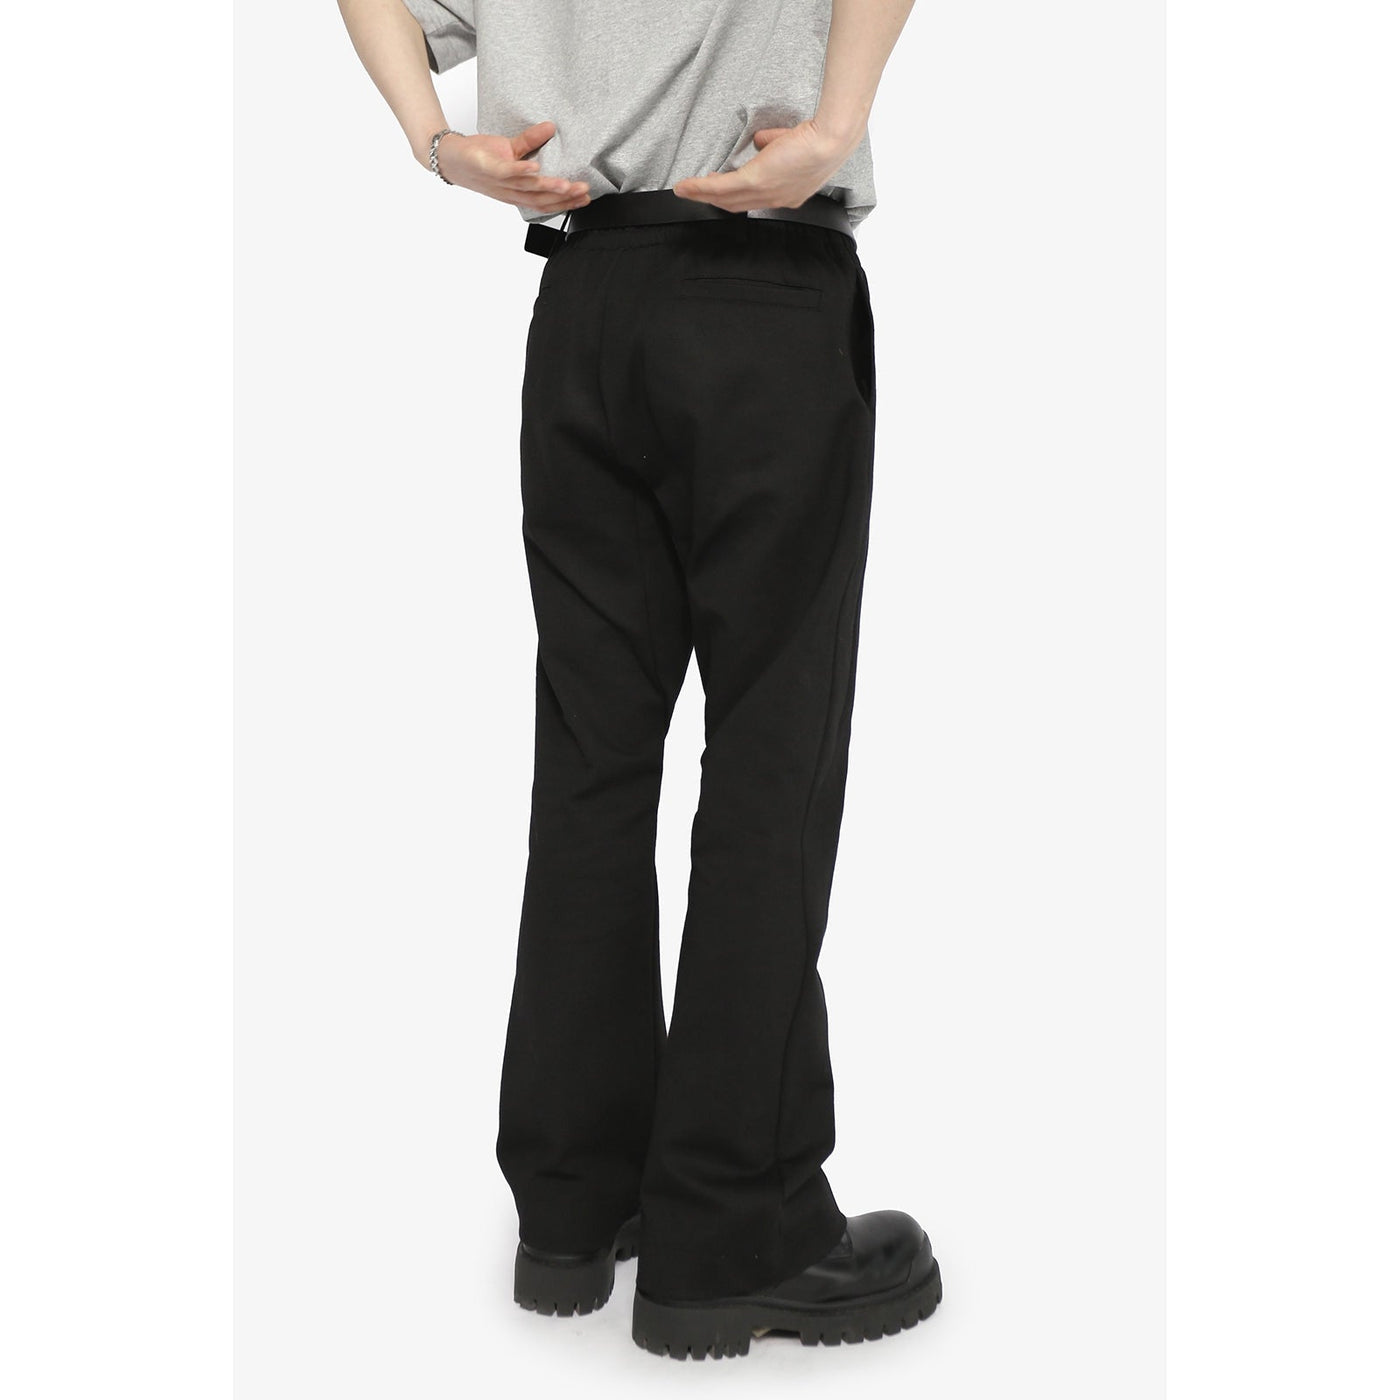 Wide Bottom Pants Korean Street Fashion Pants By Poikilotherm Shop Online at OH Vault